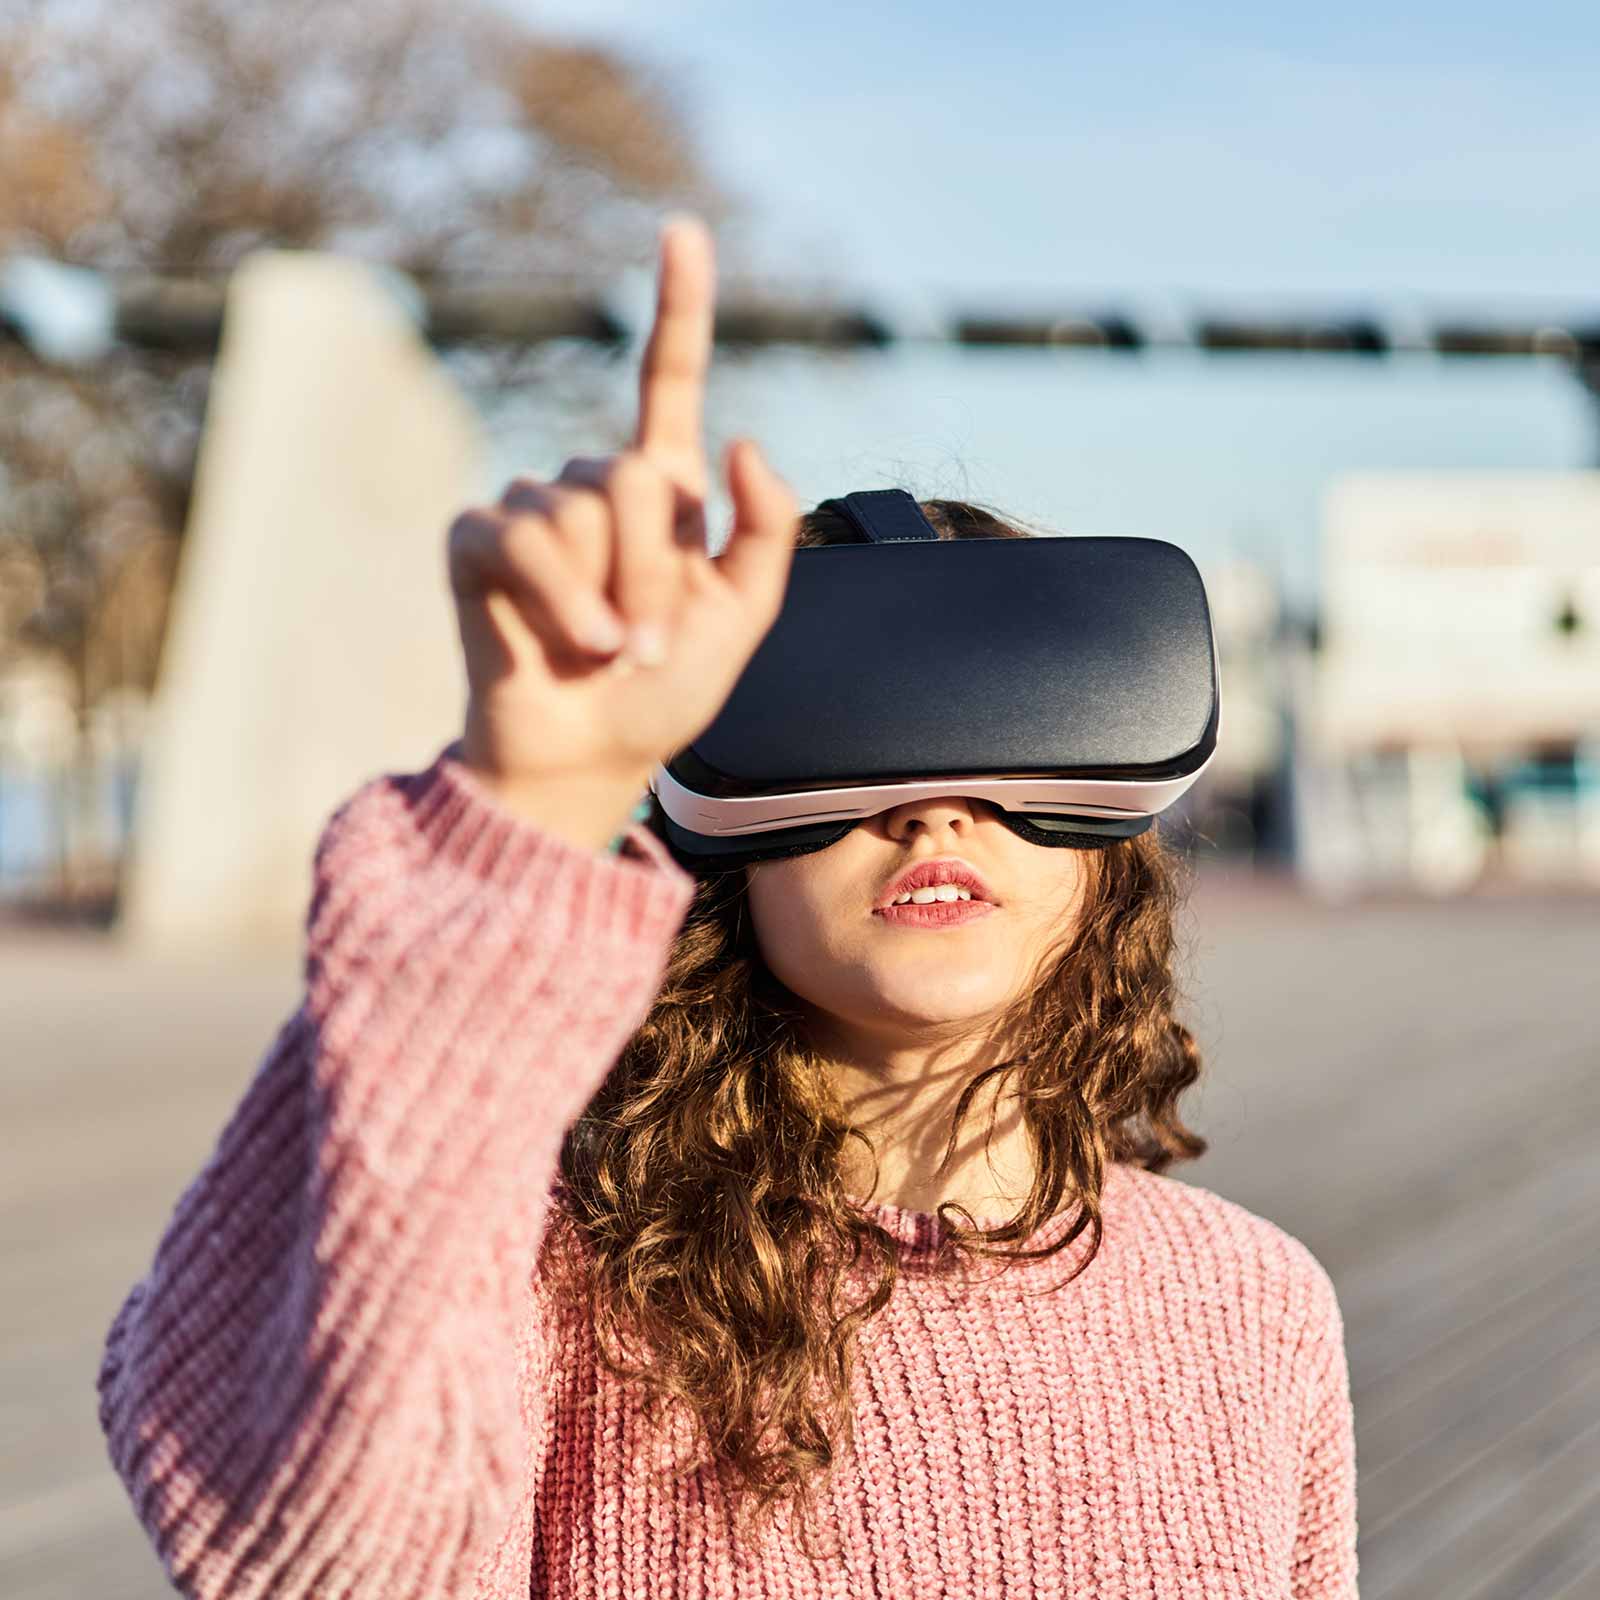 Young woman wearing a pink sweater and a VR headset outdoors